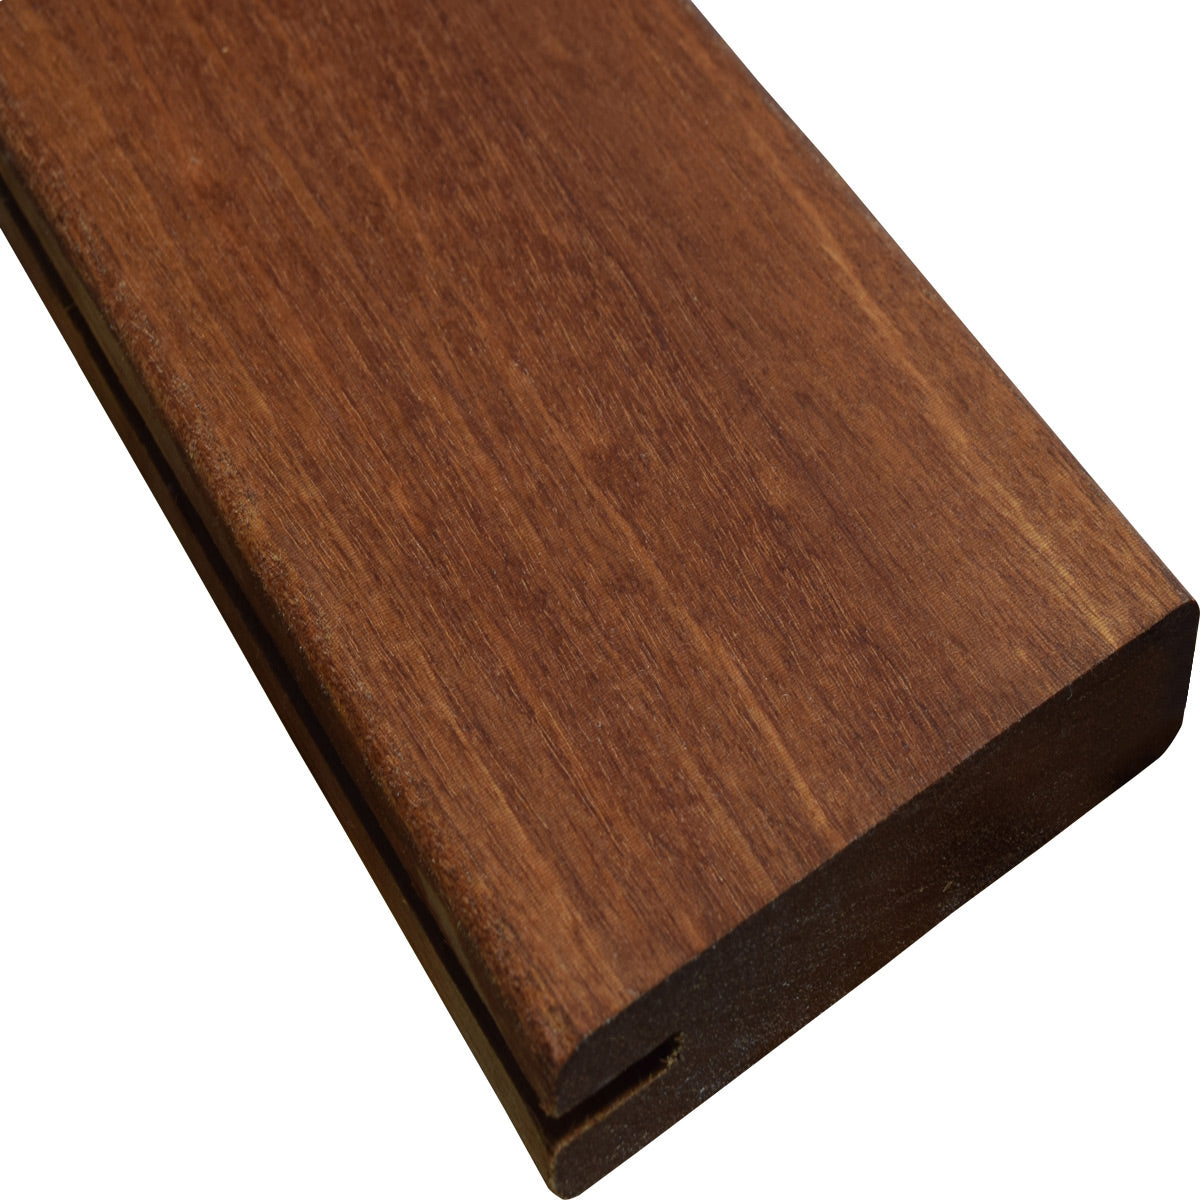 5/4 x 4 Mahogany (Red Balau) Wood One Sided Pregrooved Decking